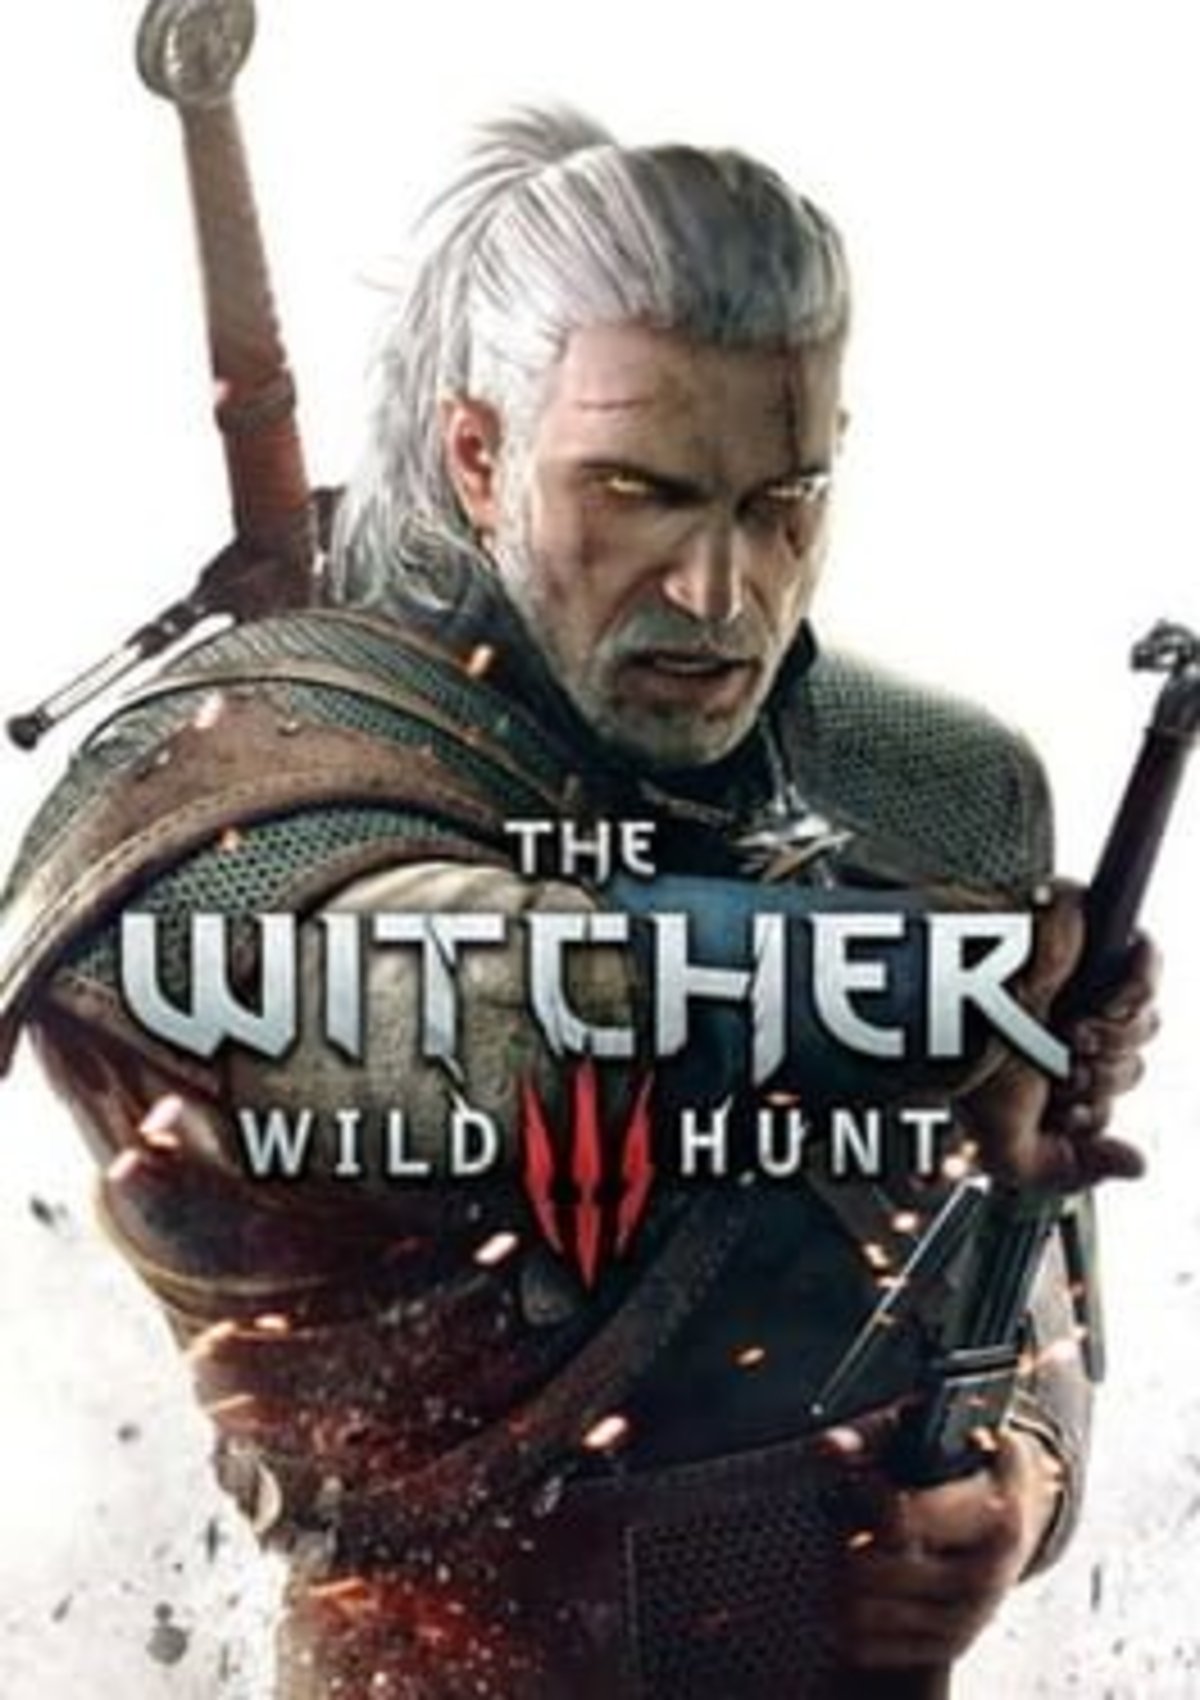 CD Projekt is hiring for a new open world game